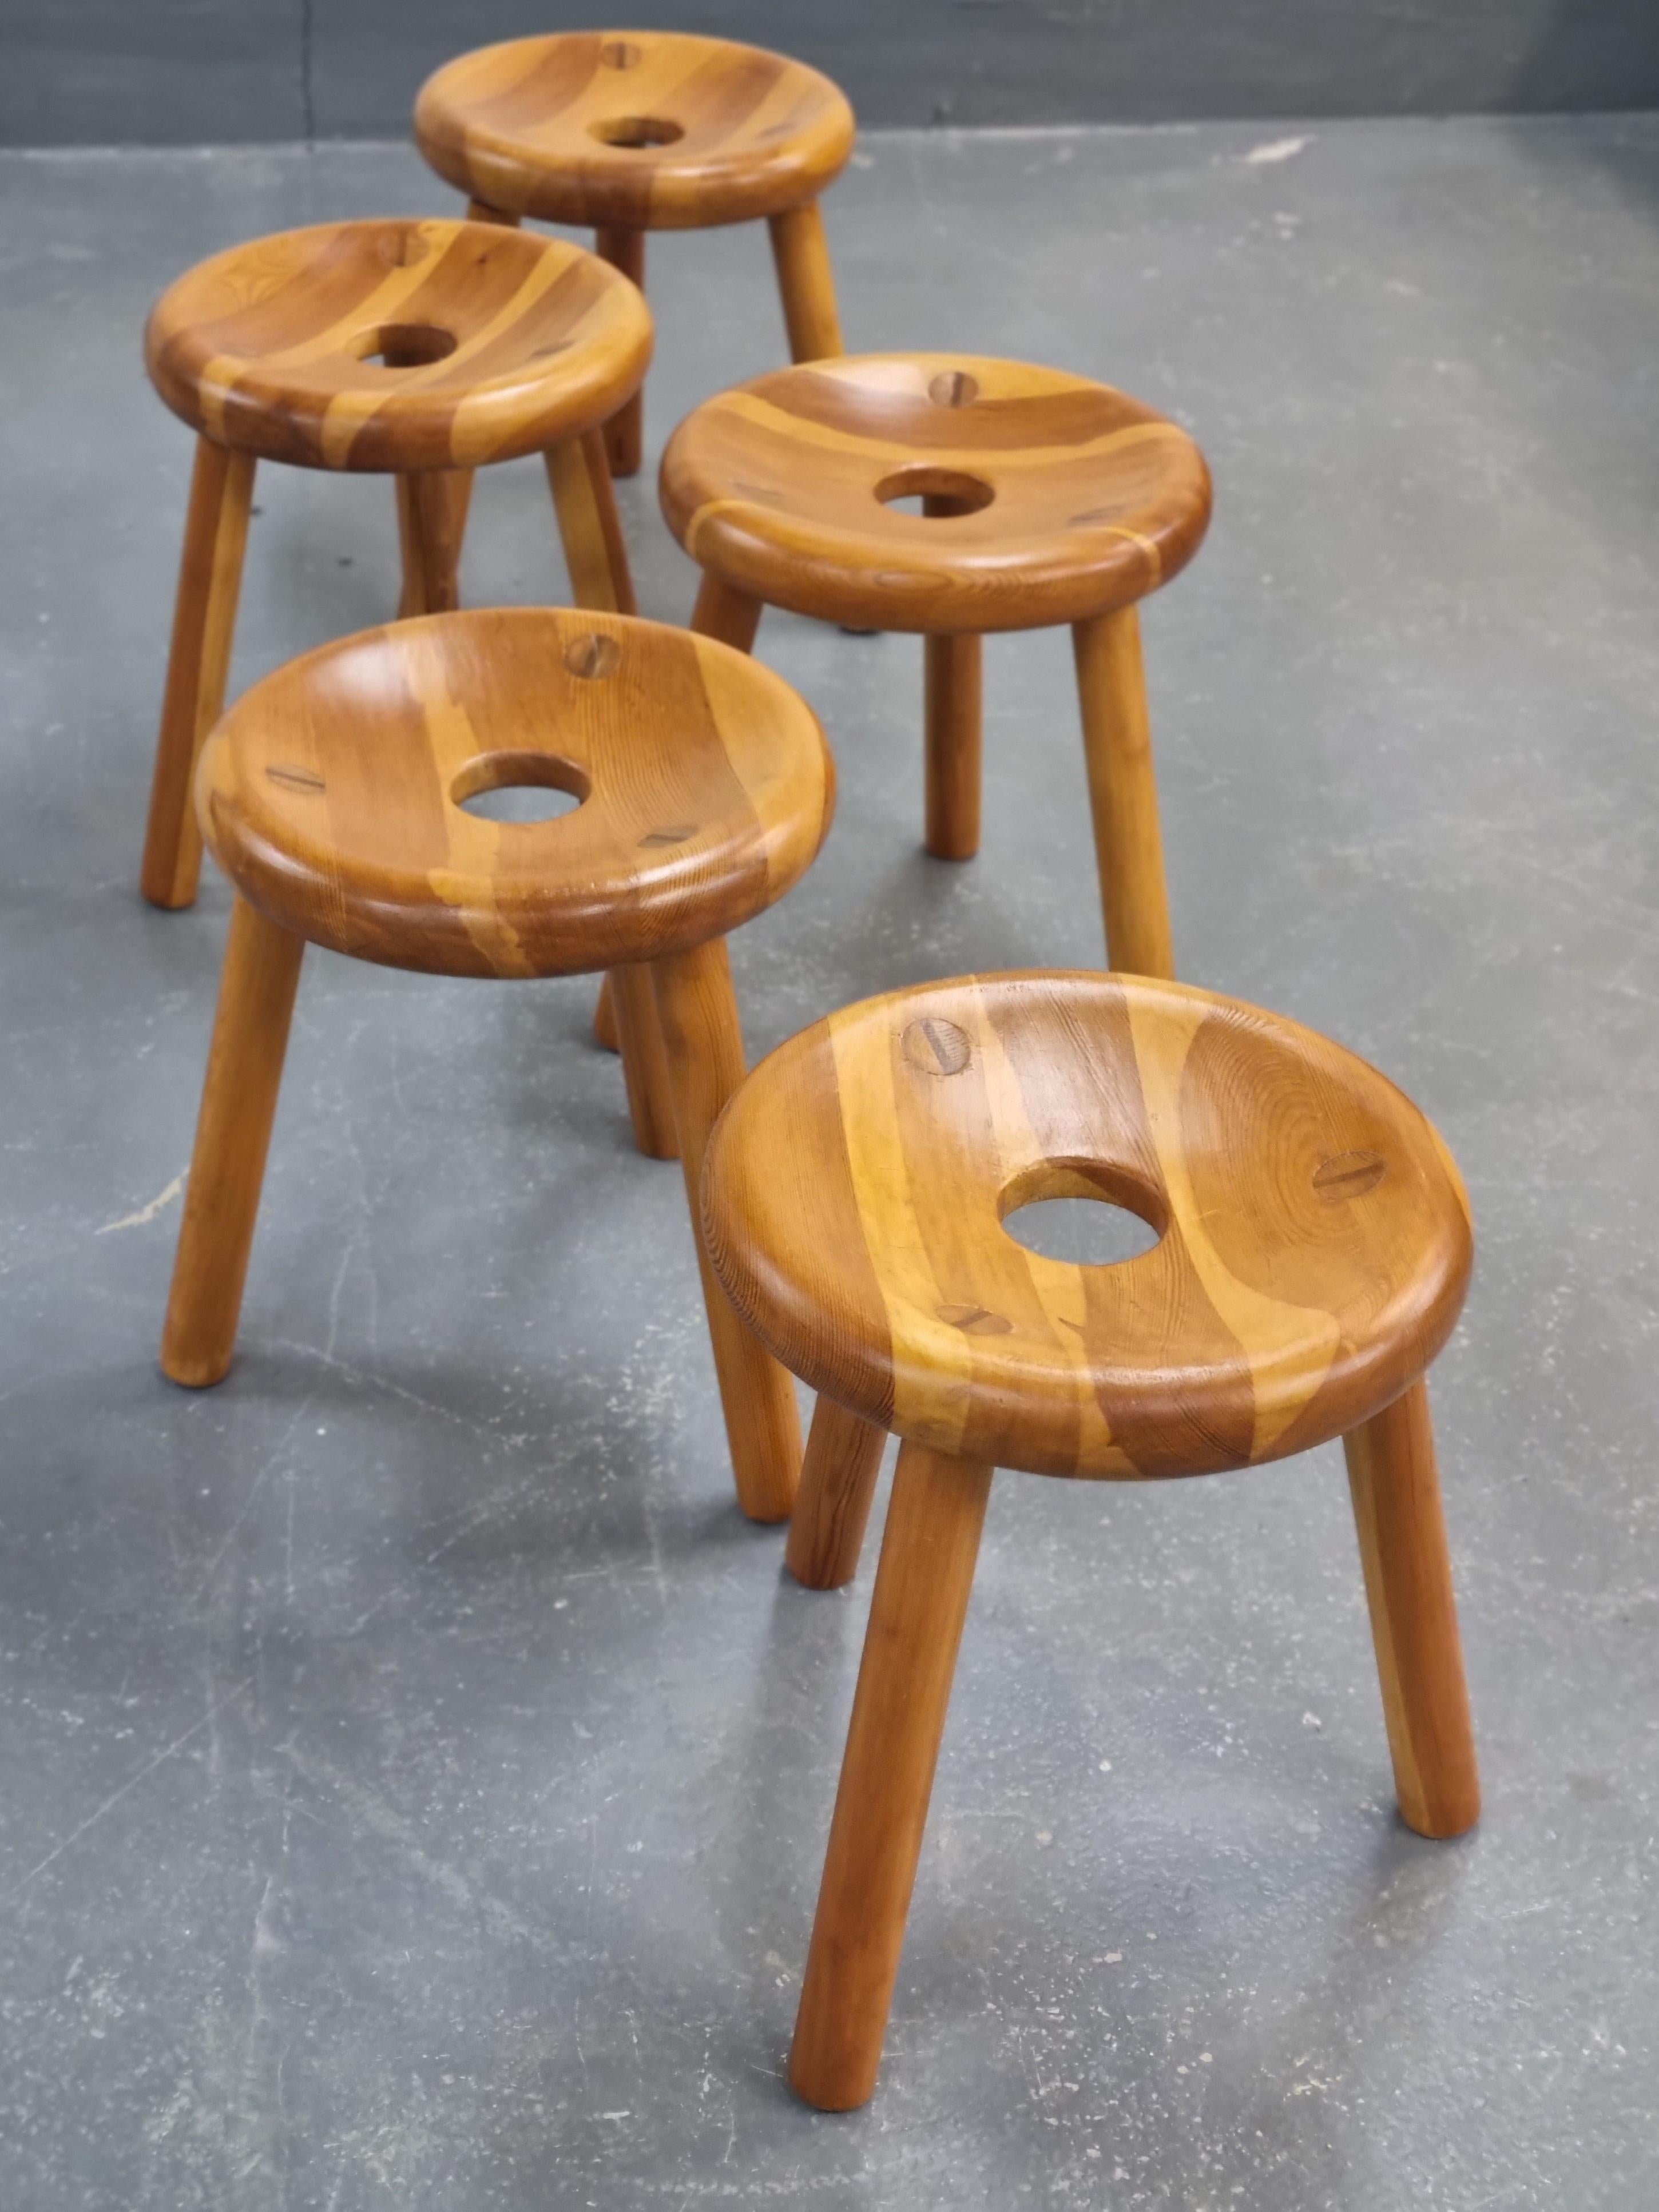 These amazing stools were designed by marvelous Finnish designer Bertel Gardberg (1919-2007) in 1950s'. 

He was the master of form and function. The stools are varnished pinewood and they have 4 parts: three legs and a round hollow seat with a hole